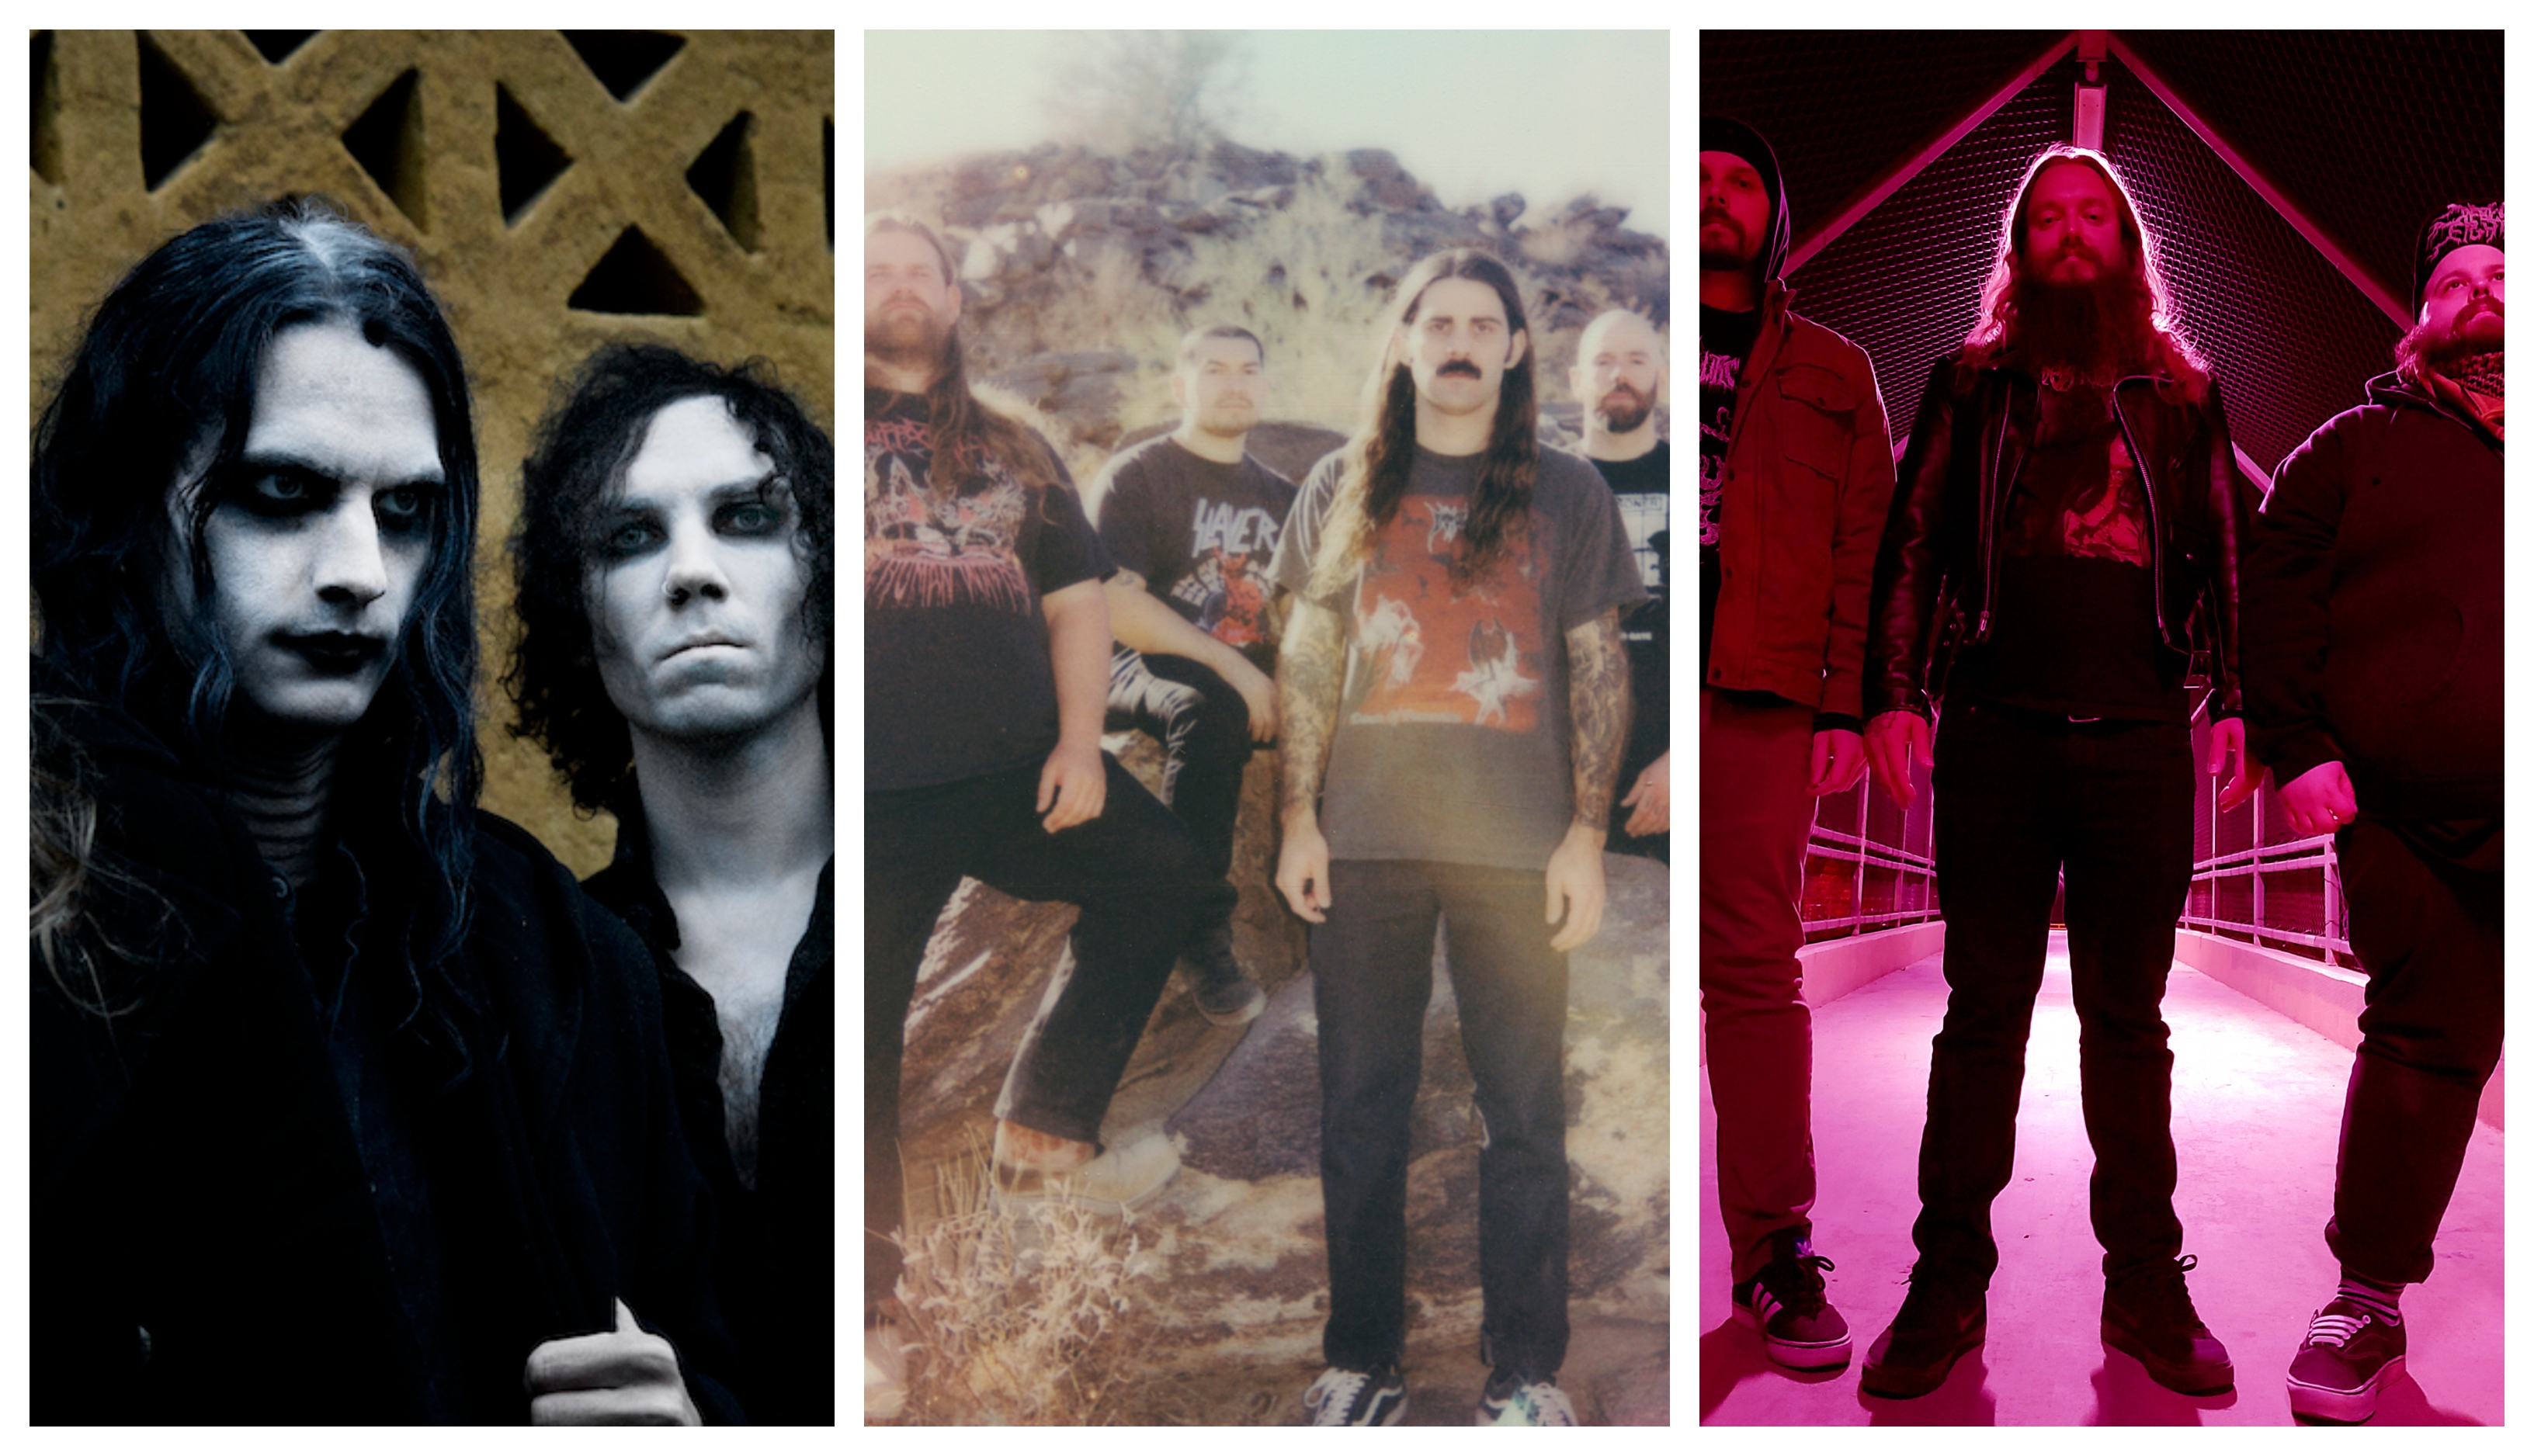 The 20 Best Metal Albums of 2015